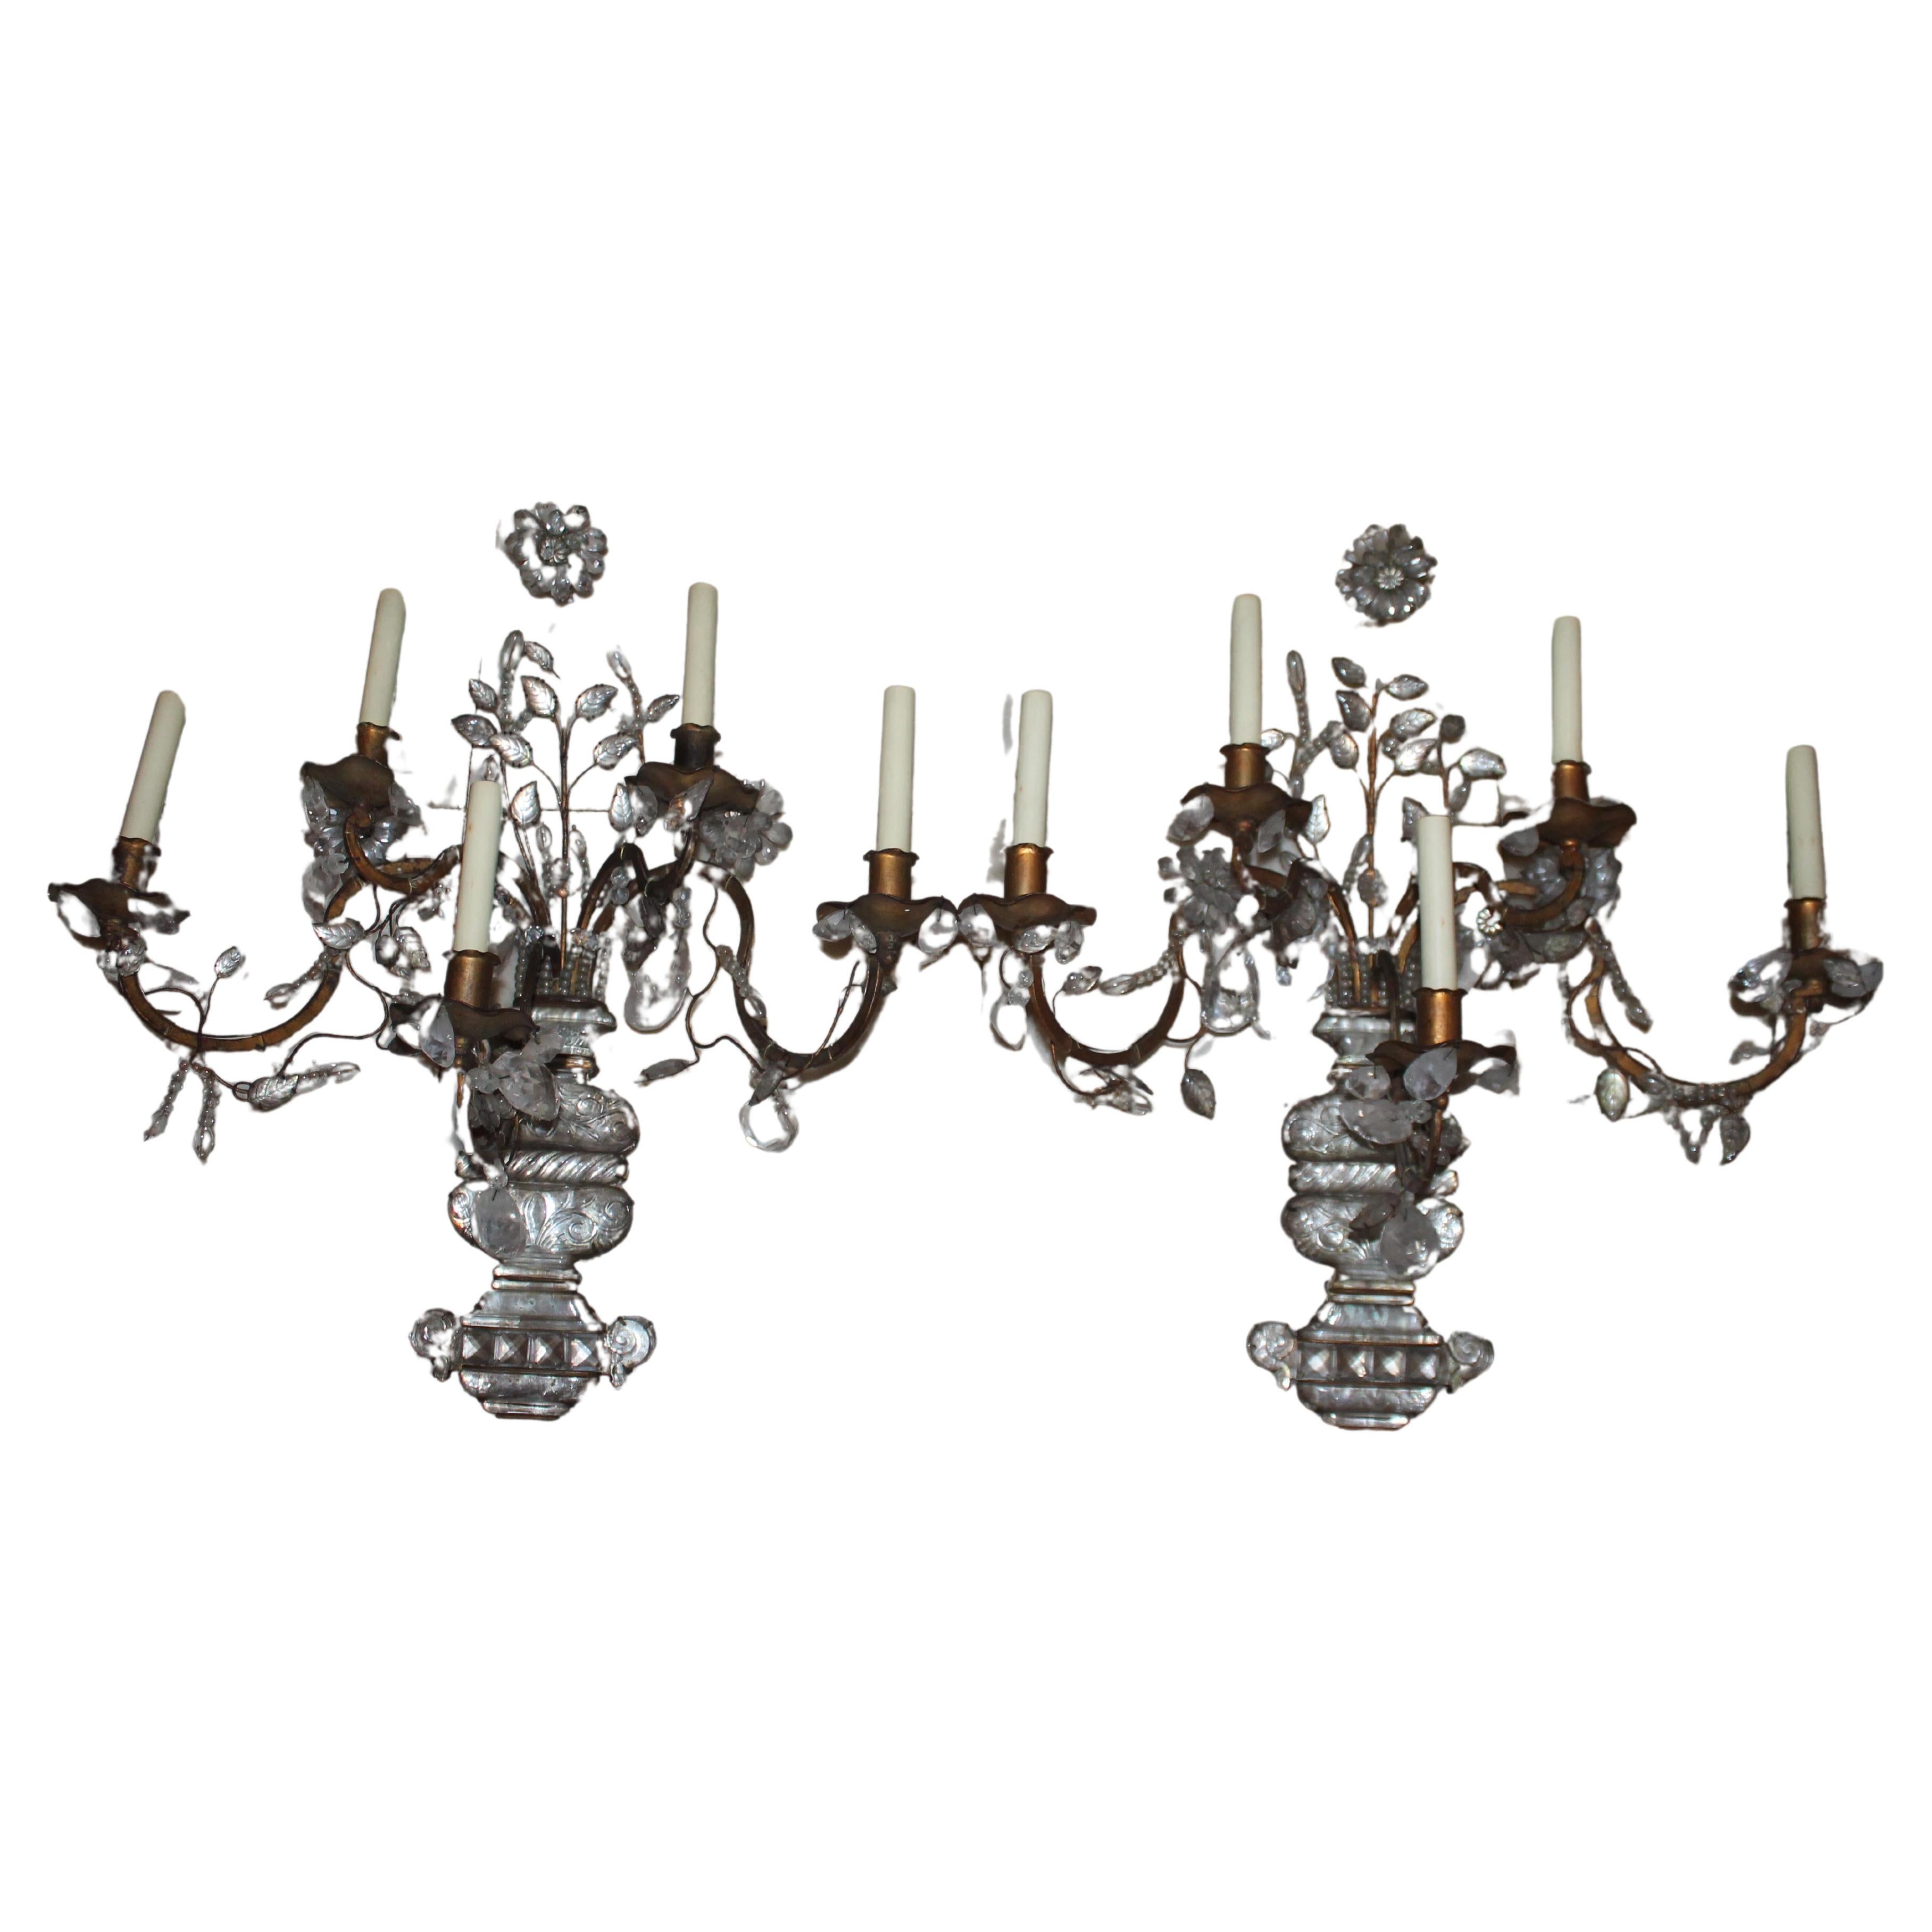 Pair XL 1940's French Regency Rock Crystal Sconces by Maison Bagues